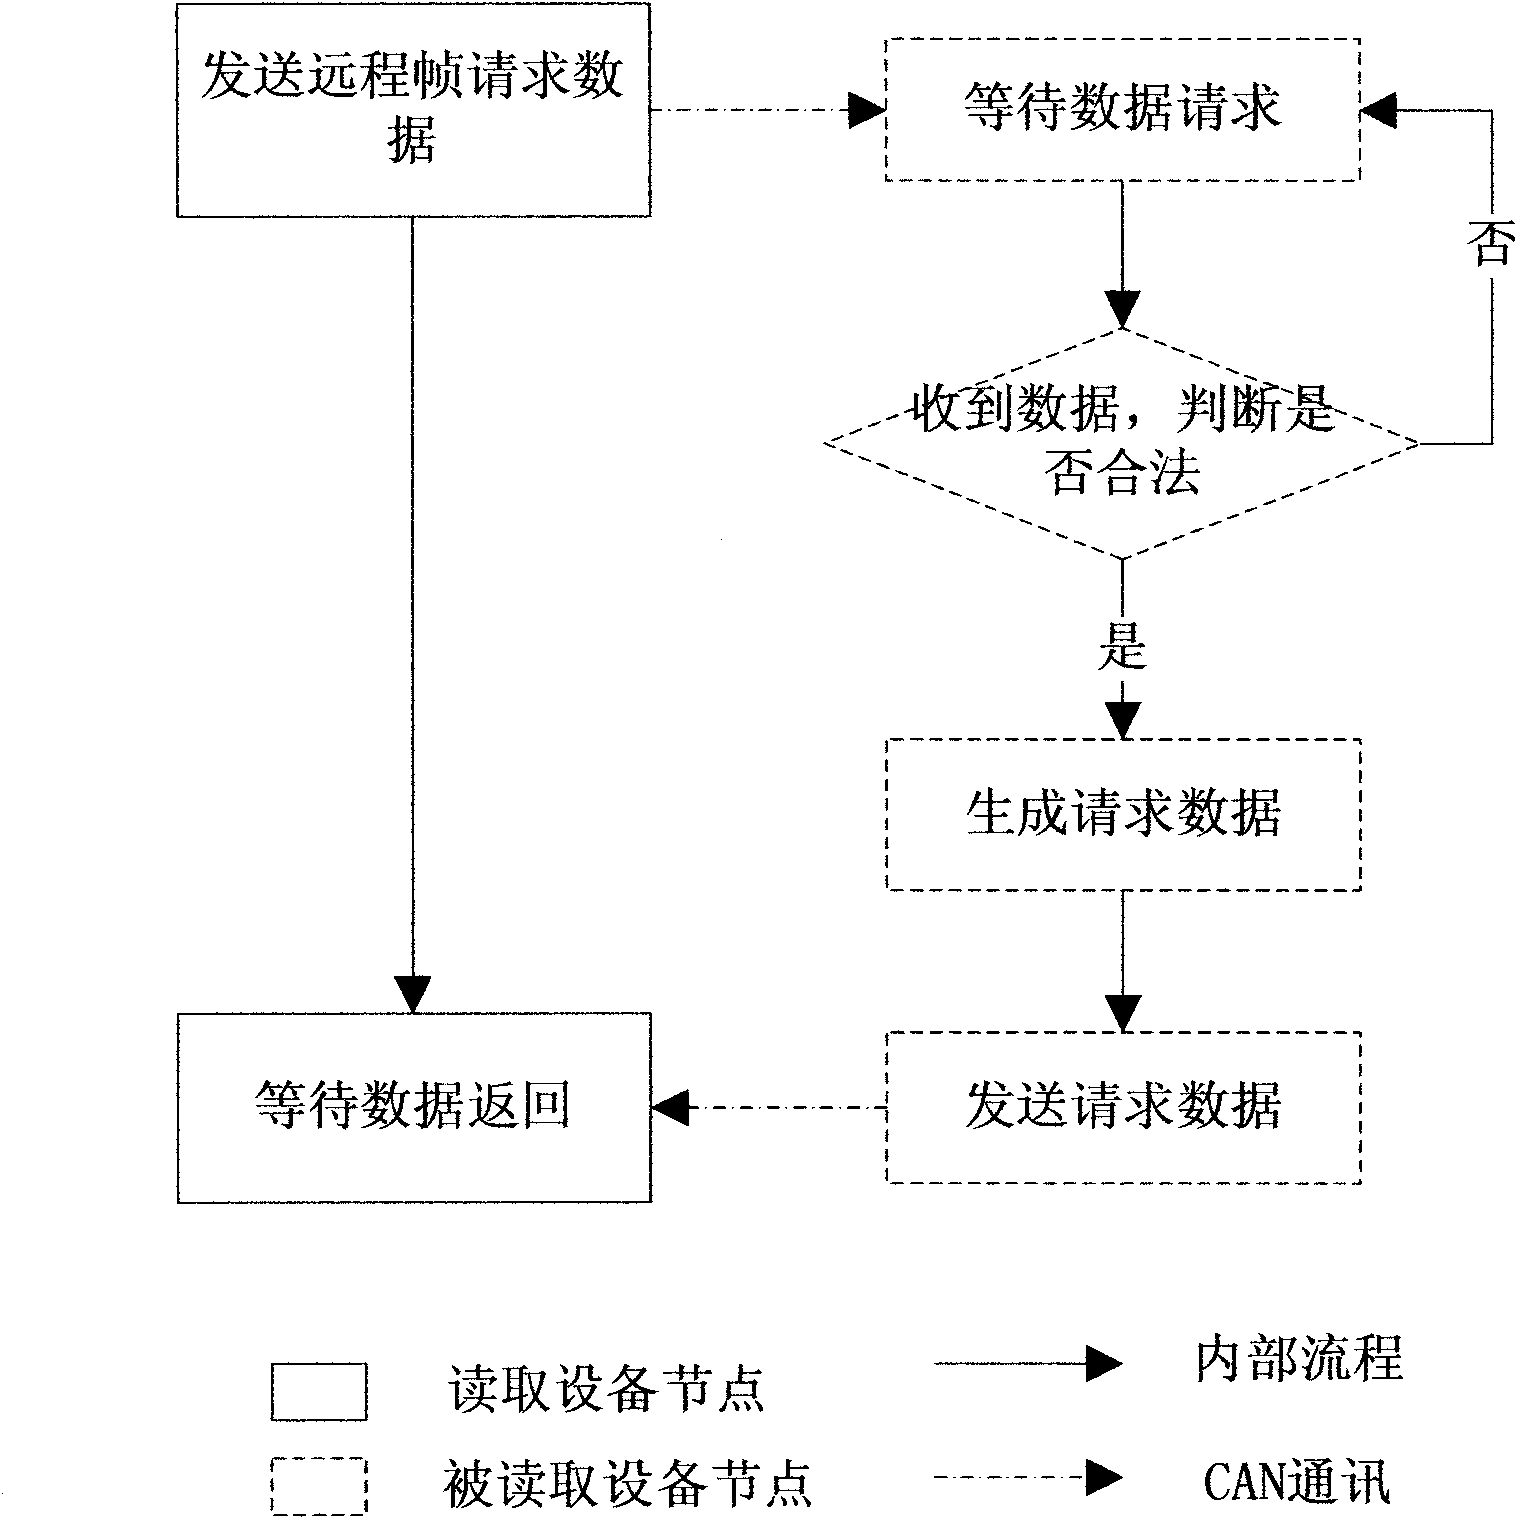 Communication method of application layer in CAN bus system